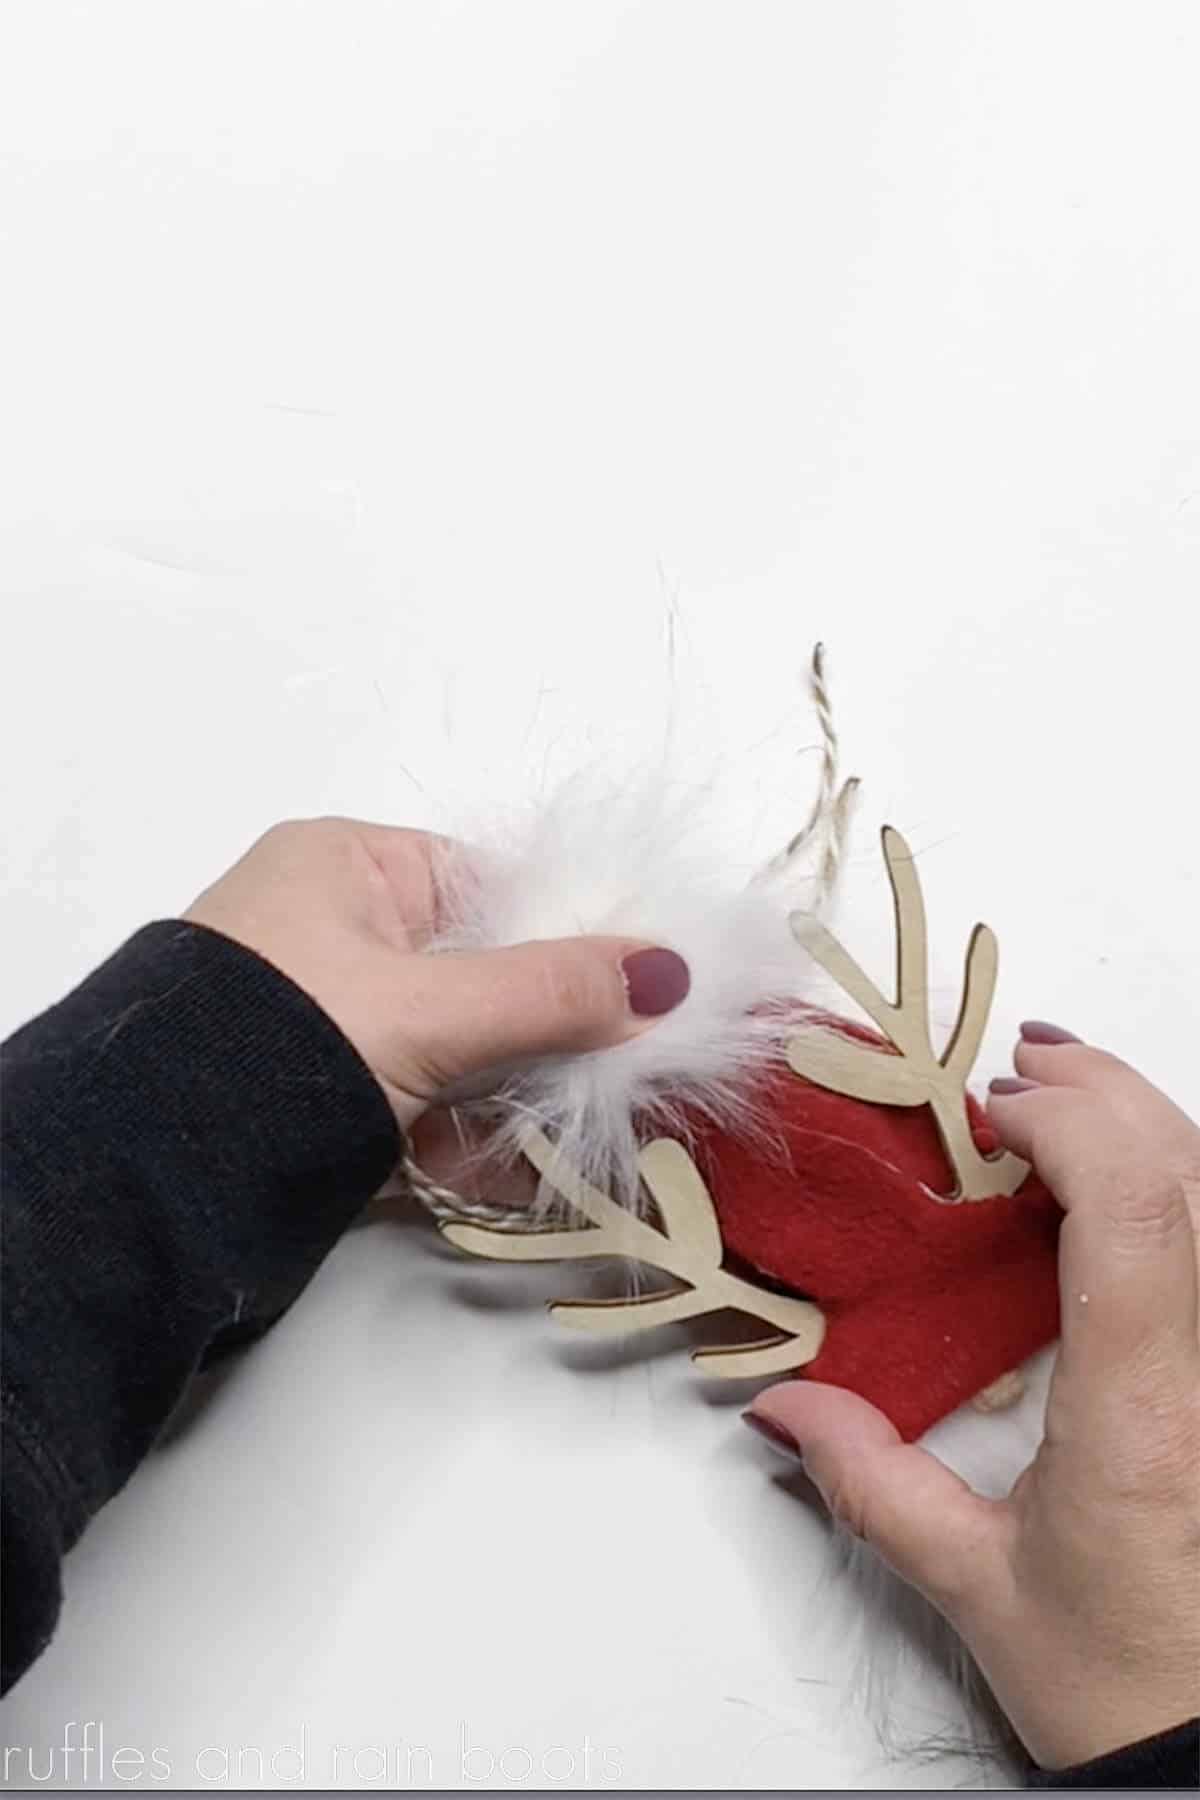 Crafter gluing on a fur pompom to the top of a red gnome hat made of fleece.